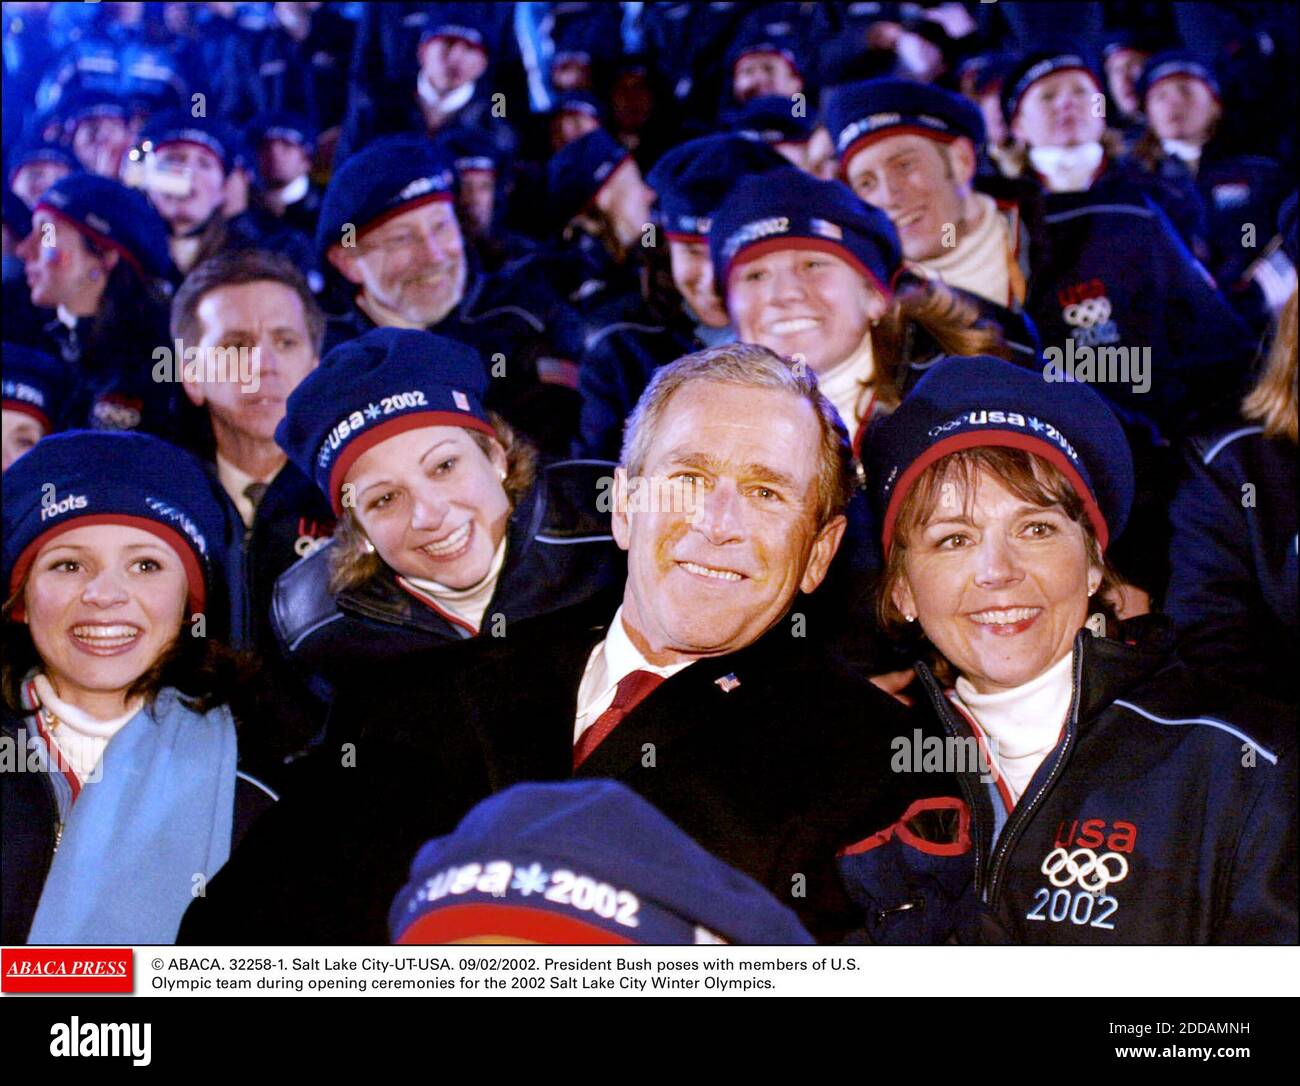 NO FILM, NO VIDEO, NO TV, NO DOCUMENTARY - © ABACA. 32258-1. Salt Lake City-UT-USA. 09/02/2002. President Bush poses with members of U.S. Olympic team during opening ceremonies for the 2002 Salt Lake City Winter Olympics. Stock Photo